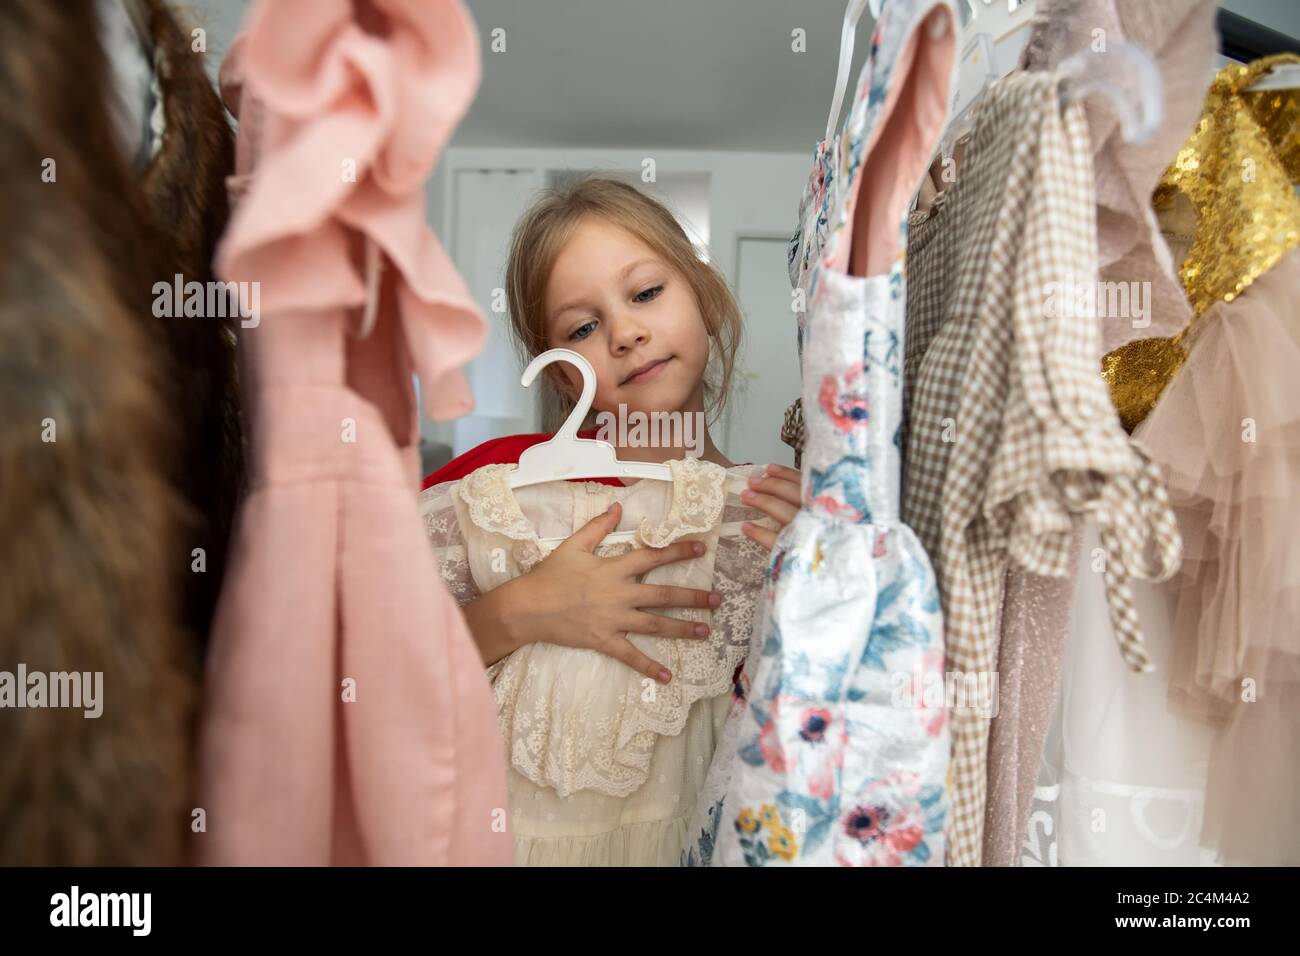 Cute little girl choosing clothes in dressing room Stock Photo